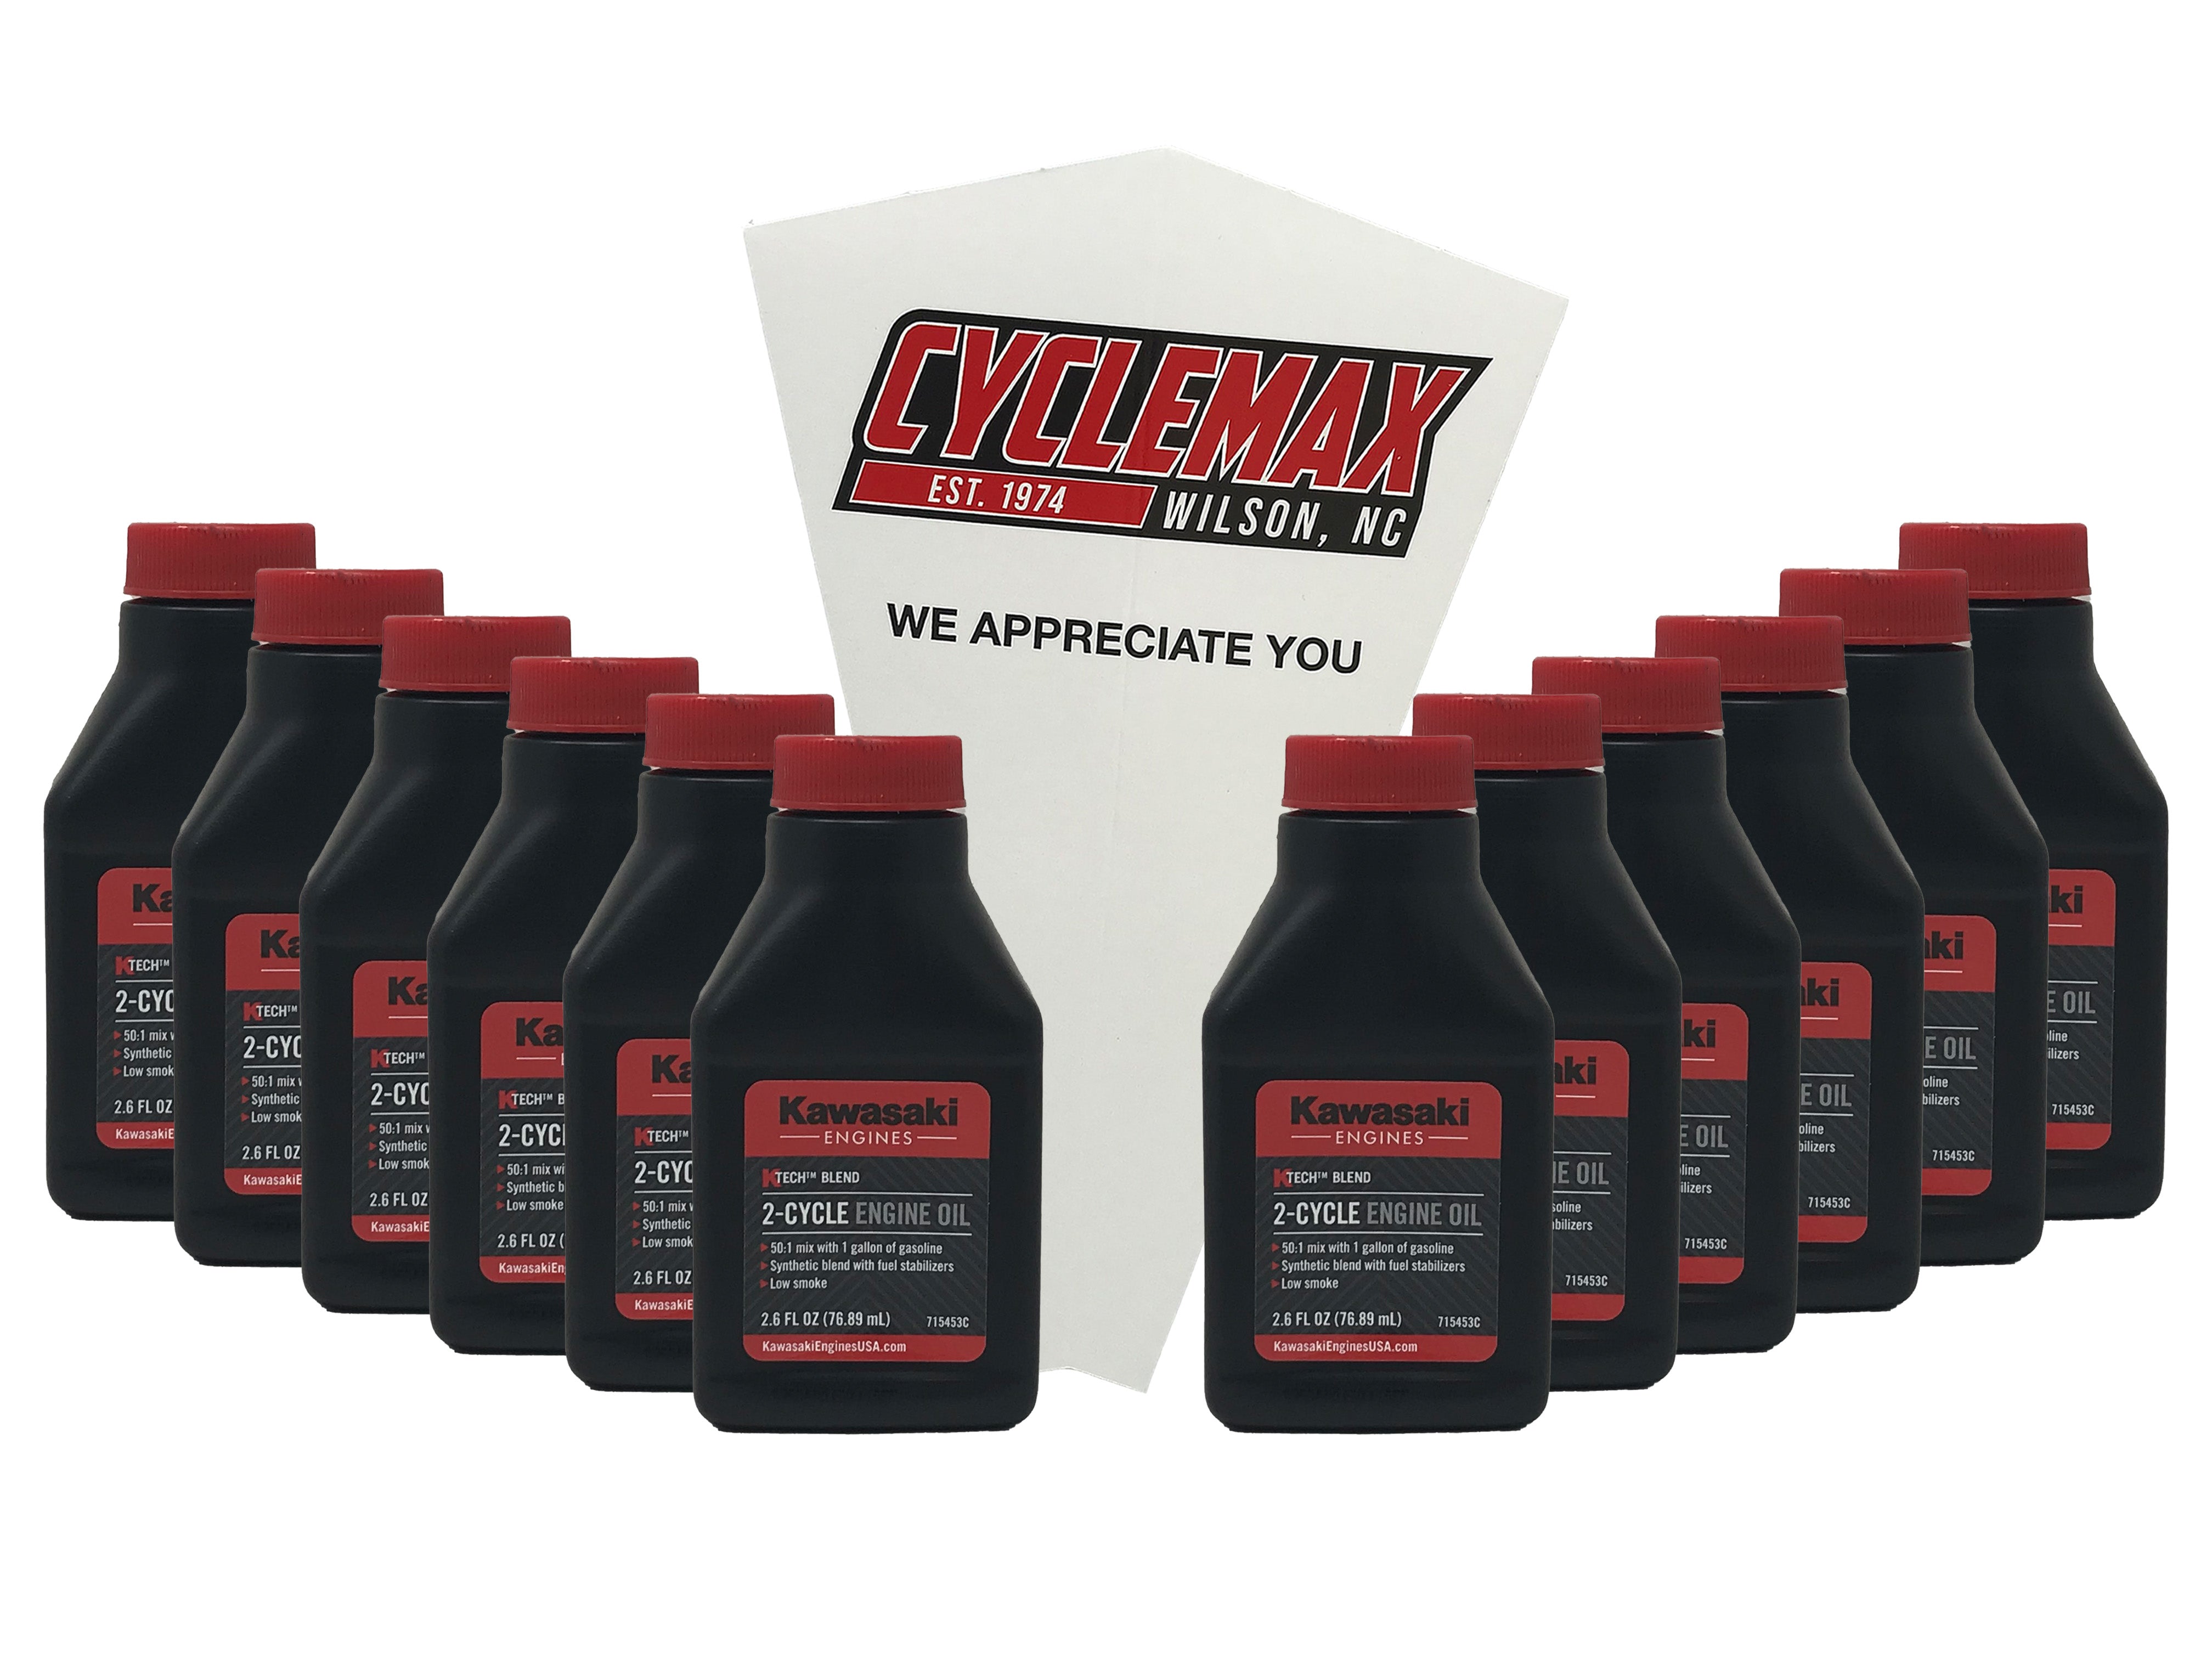 Cyclemax Twelve Pack of Kawasaki KTech 2-Cycle Two Stroke Engine Oil 2.6oz 99969-6082 Contains Twelve Bottles and a Funnel